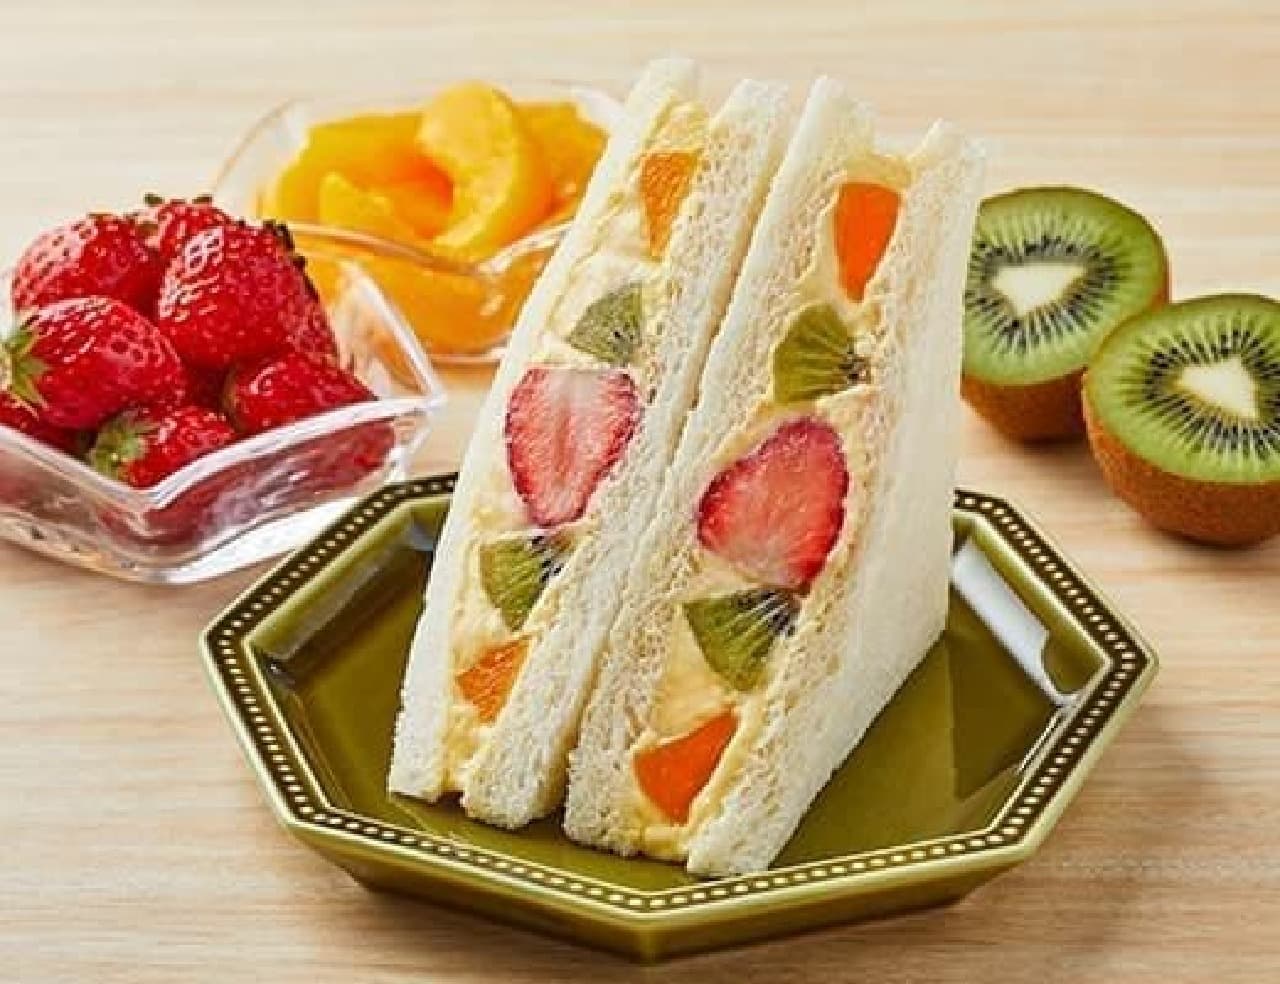 Lawson "Kasutado Mixed Fruit Sandwich Supervised by Hattendo"